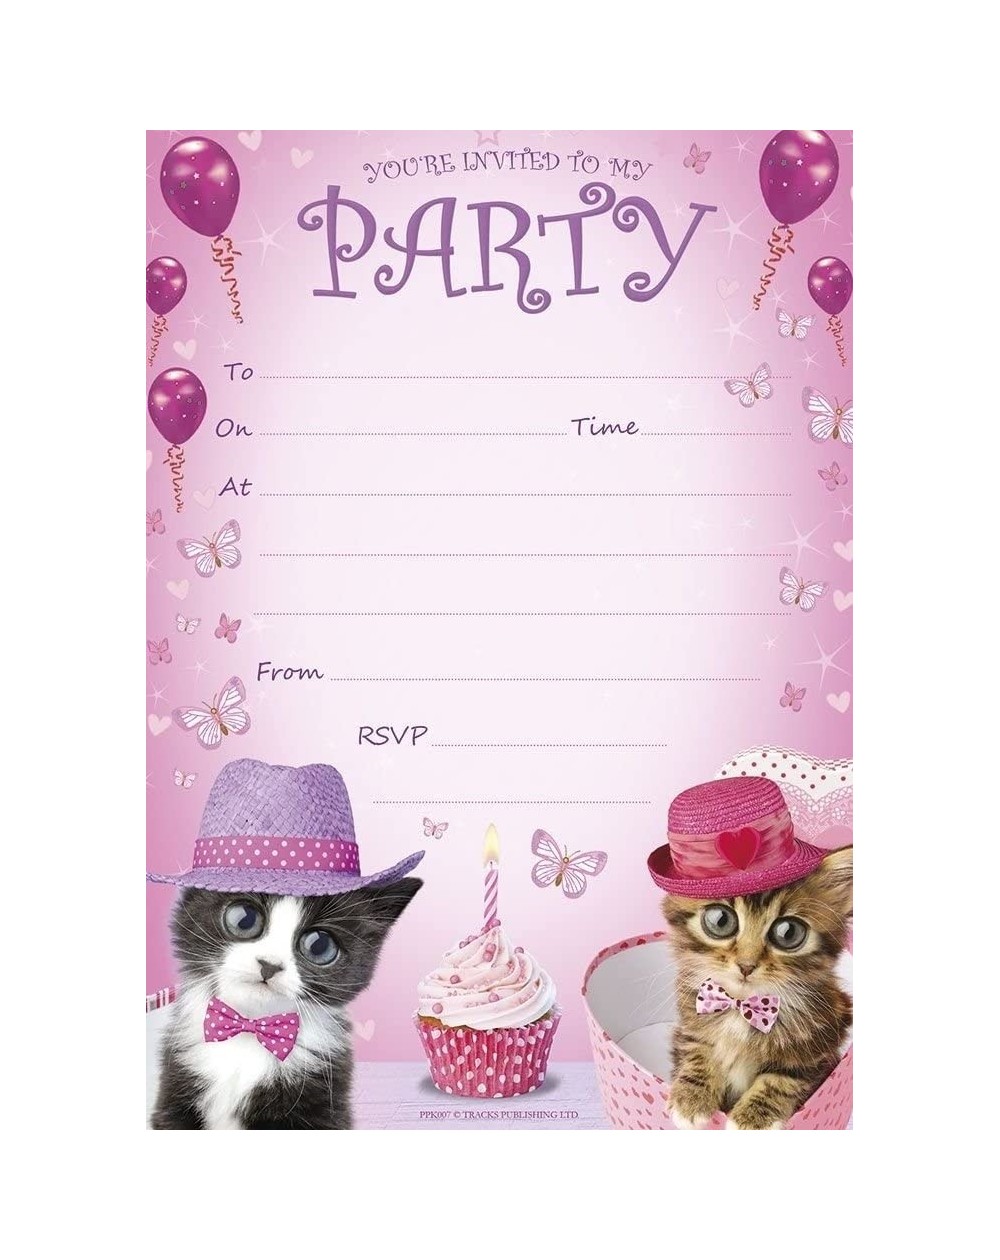 Invitations Birthday Party Invitations Cute Kittens Cupcakes - Pack 20 - CE12GVLQBB5 $10.04